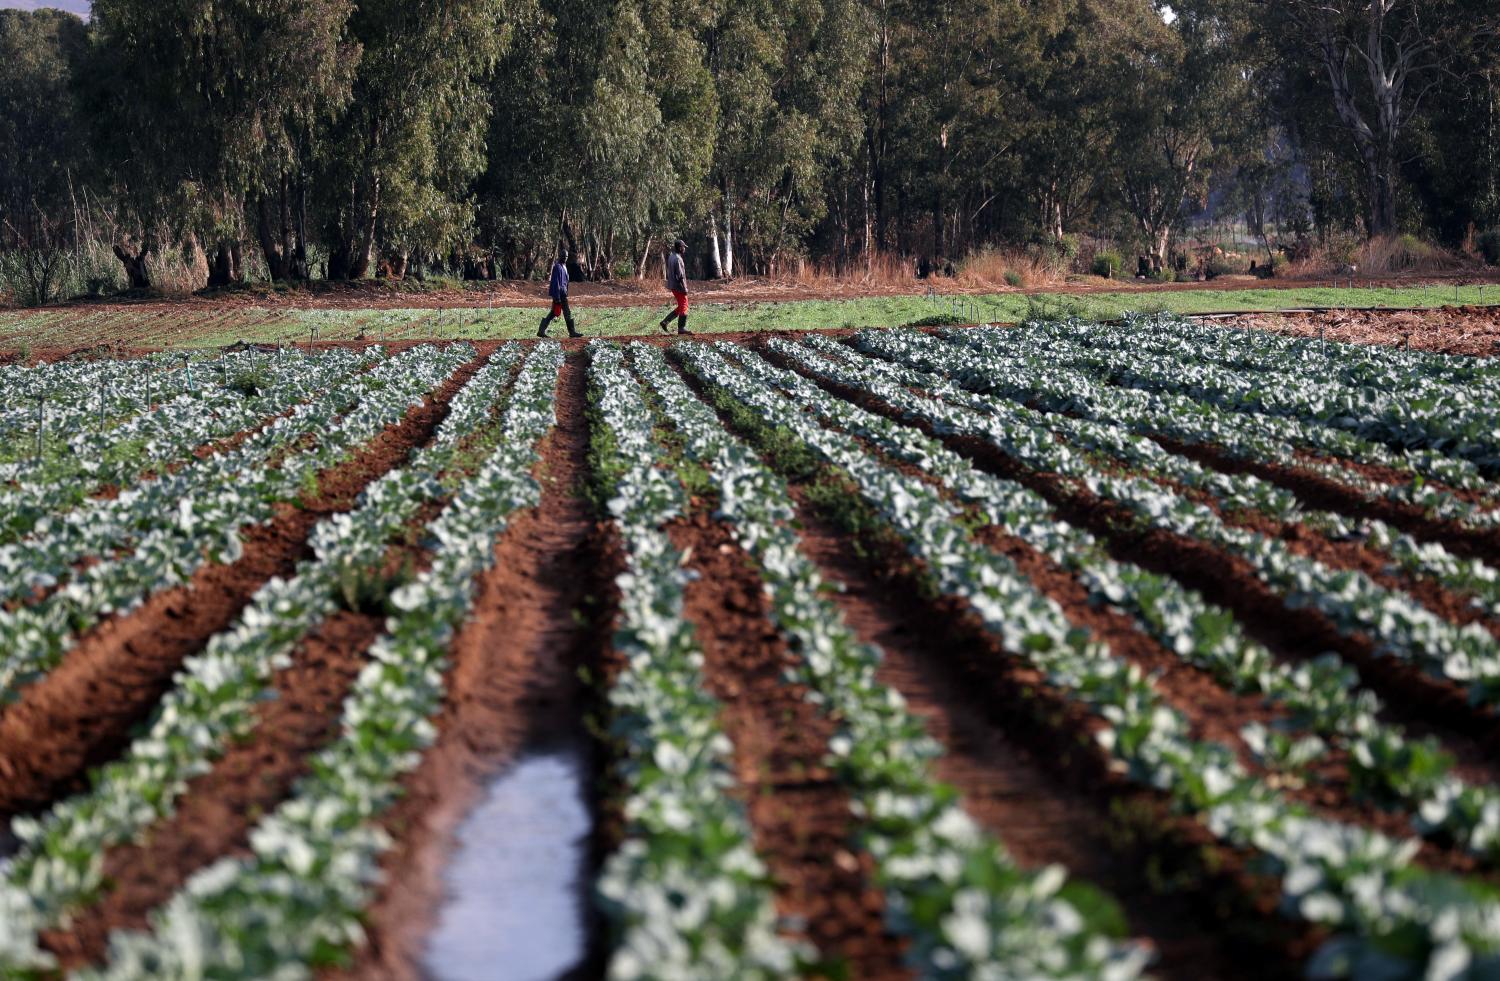 Farm workers walk between rows of vegetables at a farm in Eikenhof, South Africa, October 16, 2019. REUTERS/Siphiwe Sibeko - RC14F0E641A0